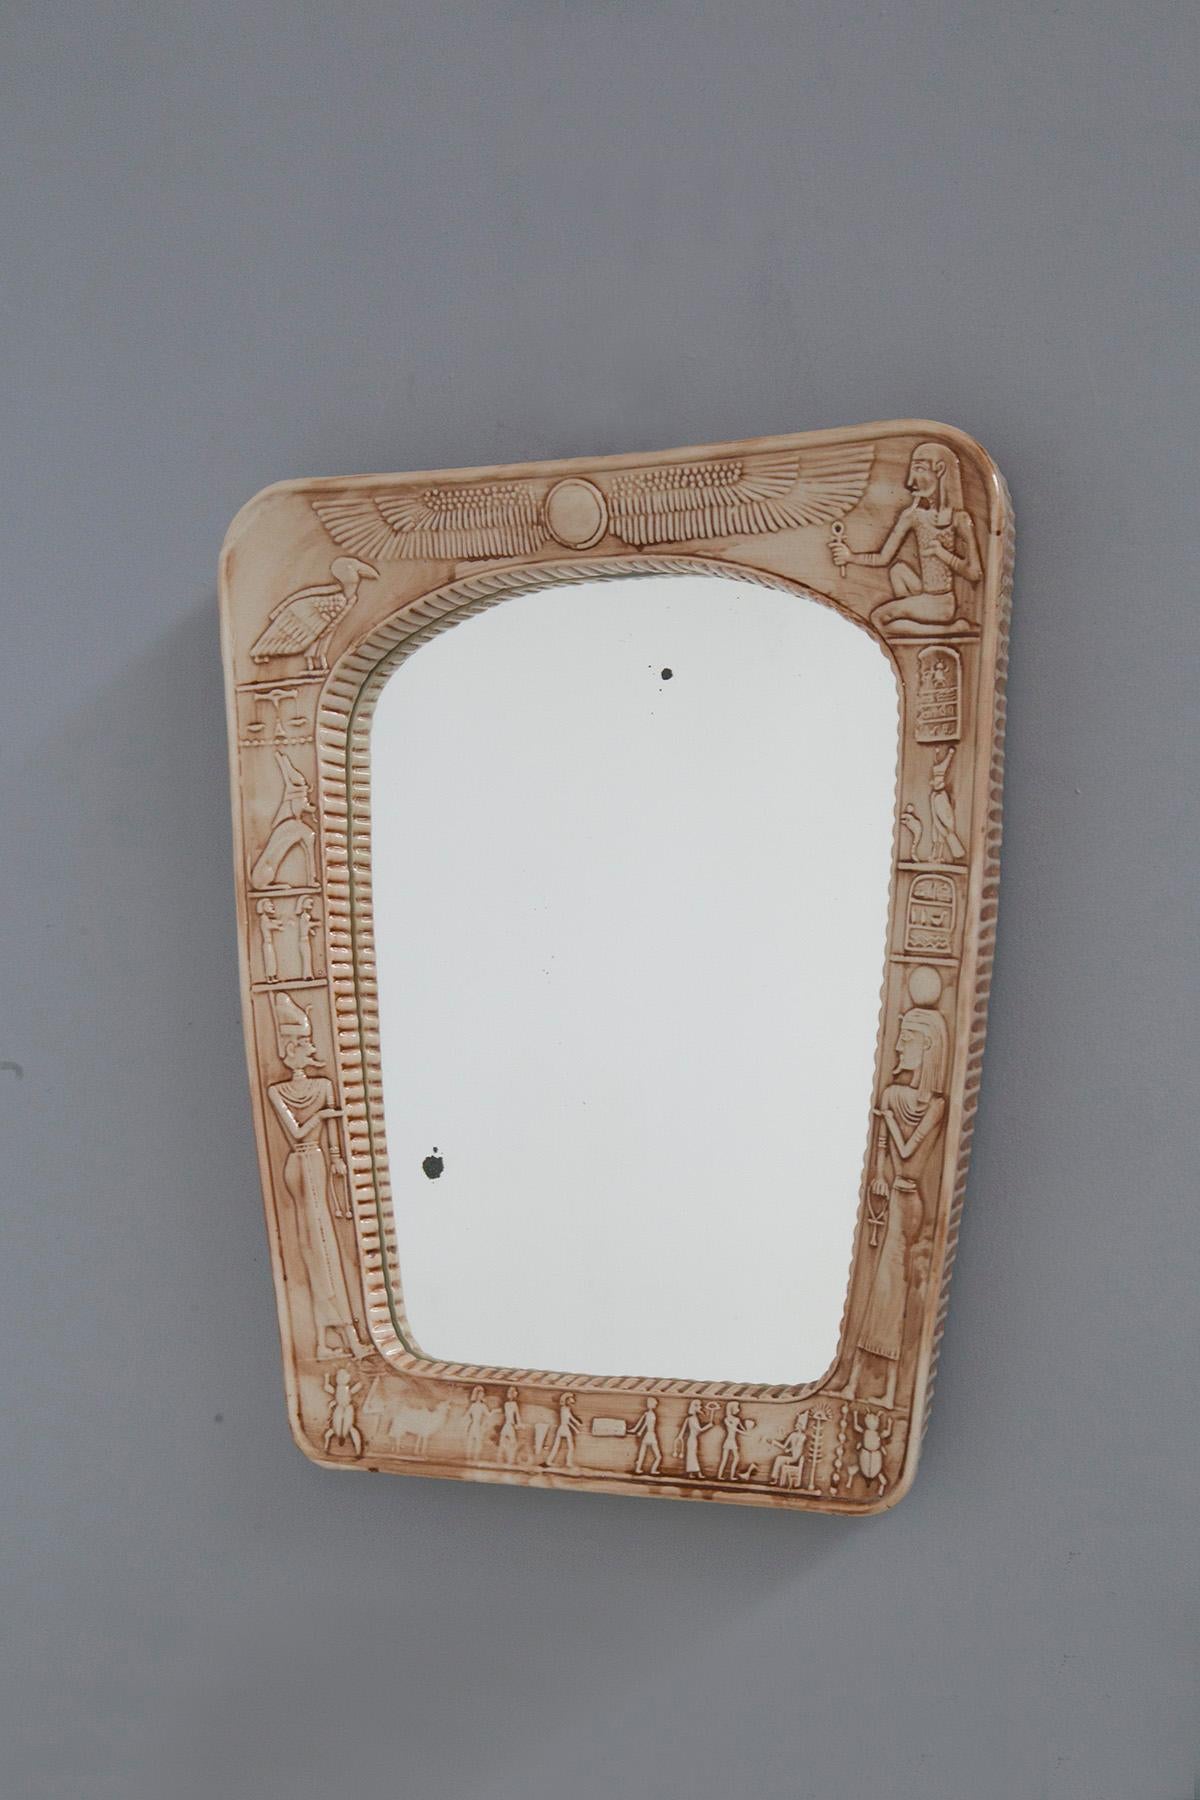 Eccentric vintage Italian mirror made of ceramic. The mirror is circa 1970s. The mirror has a ceramic frame bevelled at the sides, made by hand. Its peculiarity is found on the front, in fact it presents drawings in Egyptian pictographic script. In